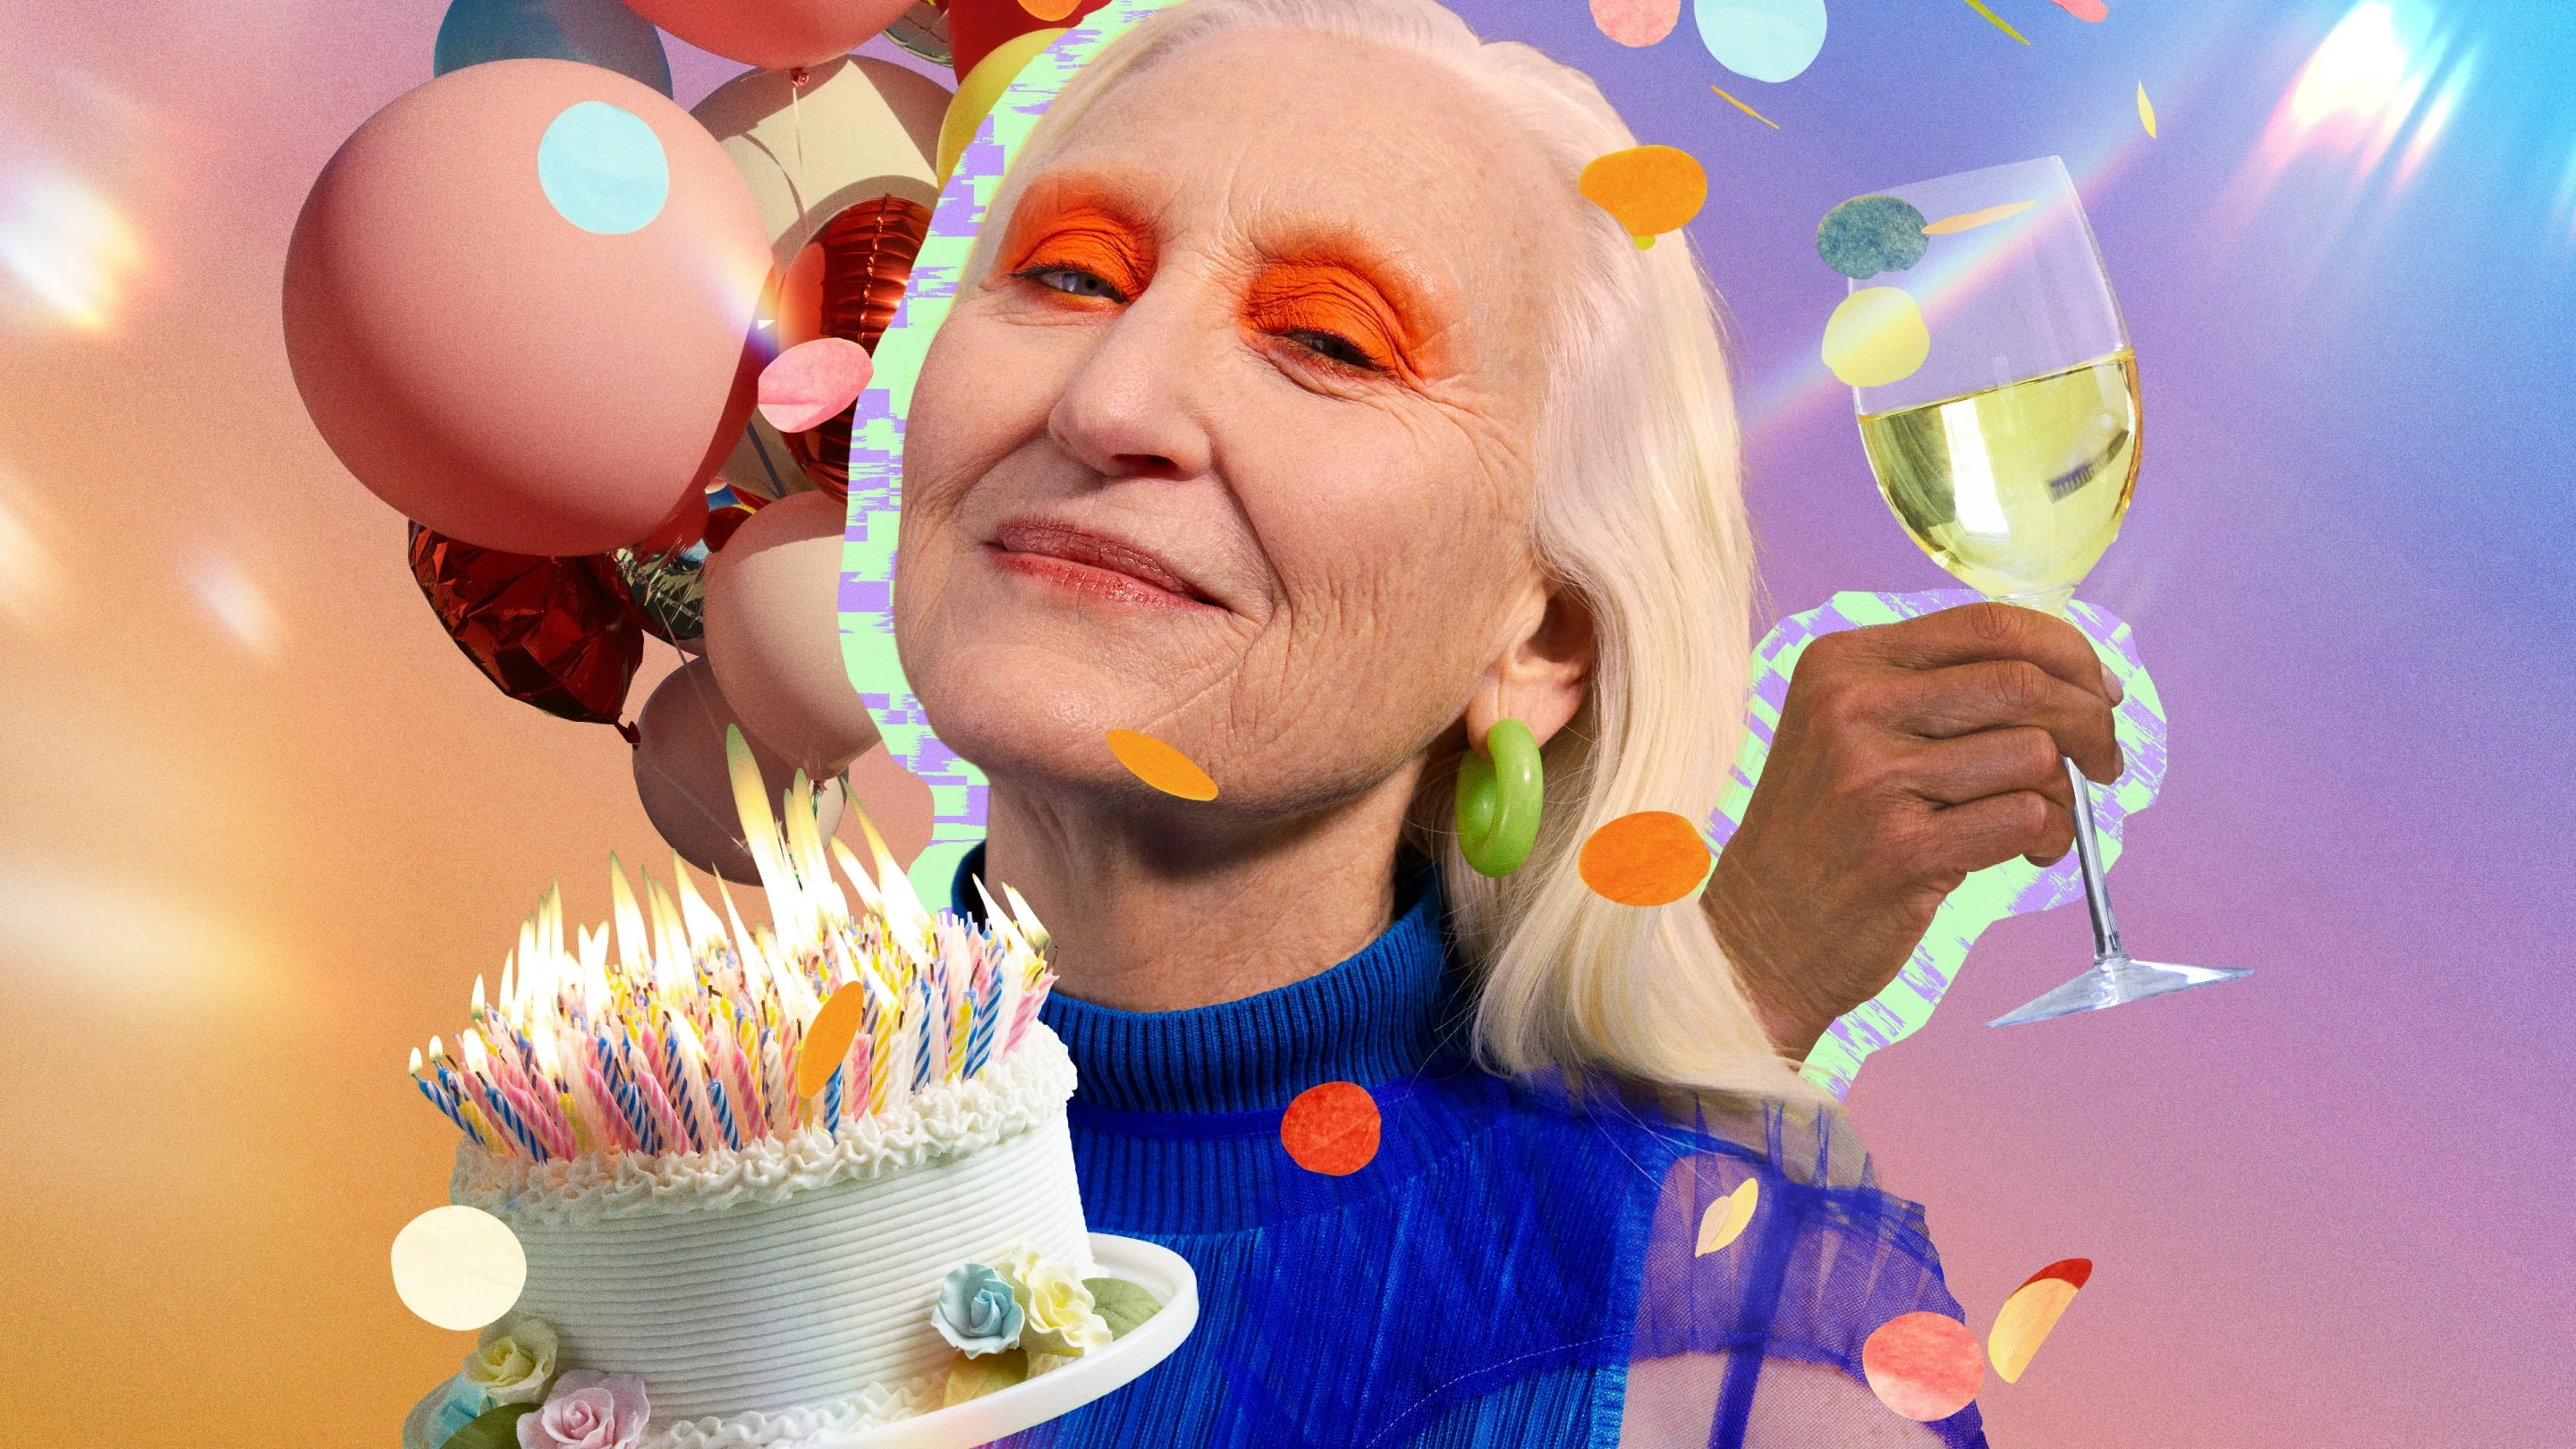 Collage featuring an older White woman with bright eye makeup surrounded by balloons, a hand holding a wine glass and a birthday cake overflowing with candles.